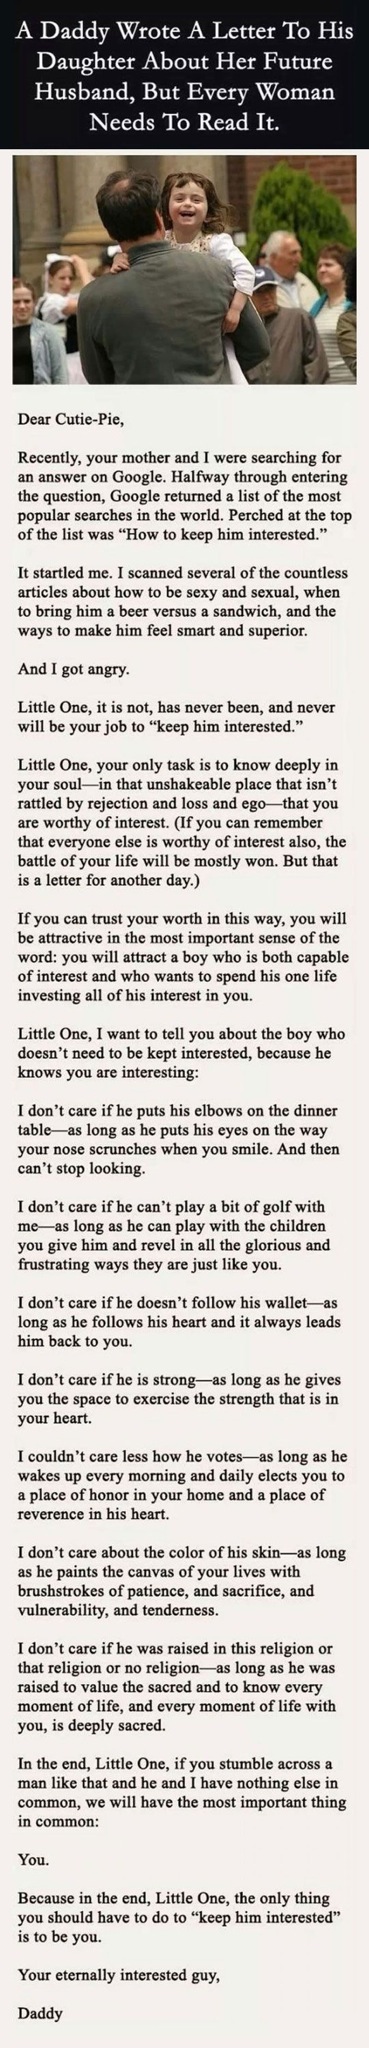 A Daddy Wrote A Letter To His Daught About Her Future Husband, But Every Women Needa To Read It: